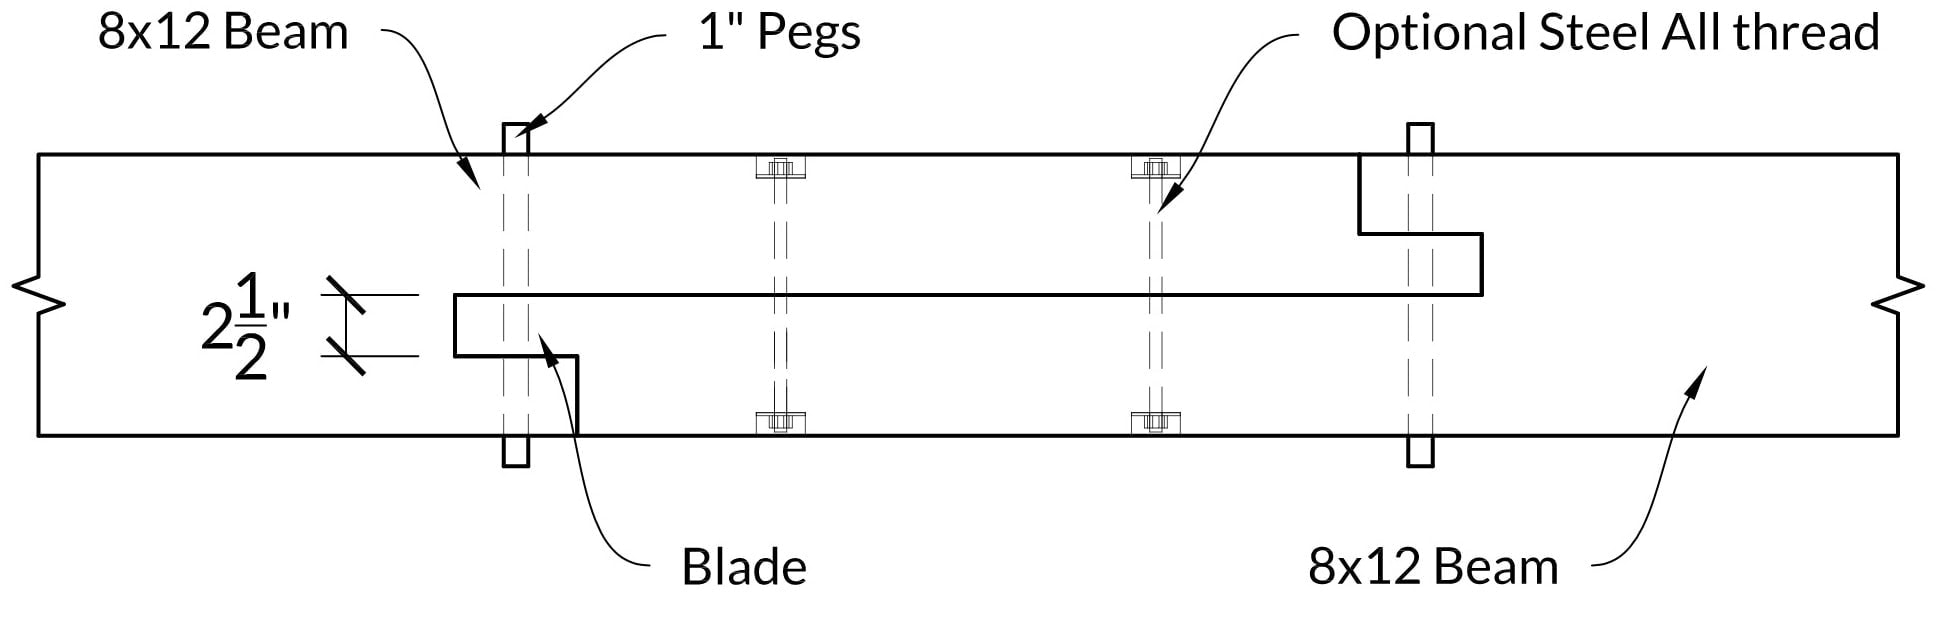 bladed scarf joint